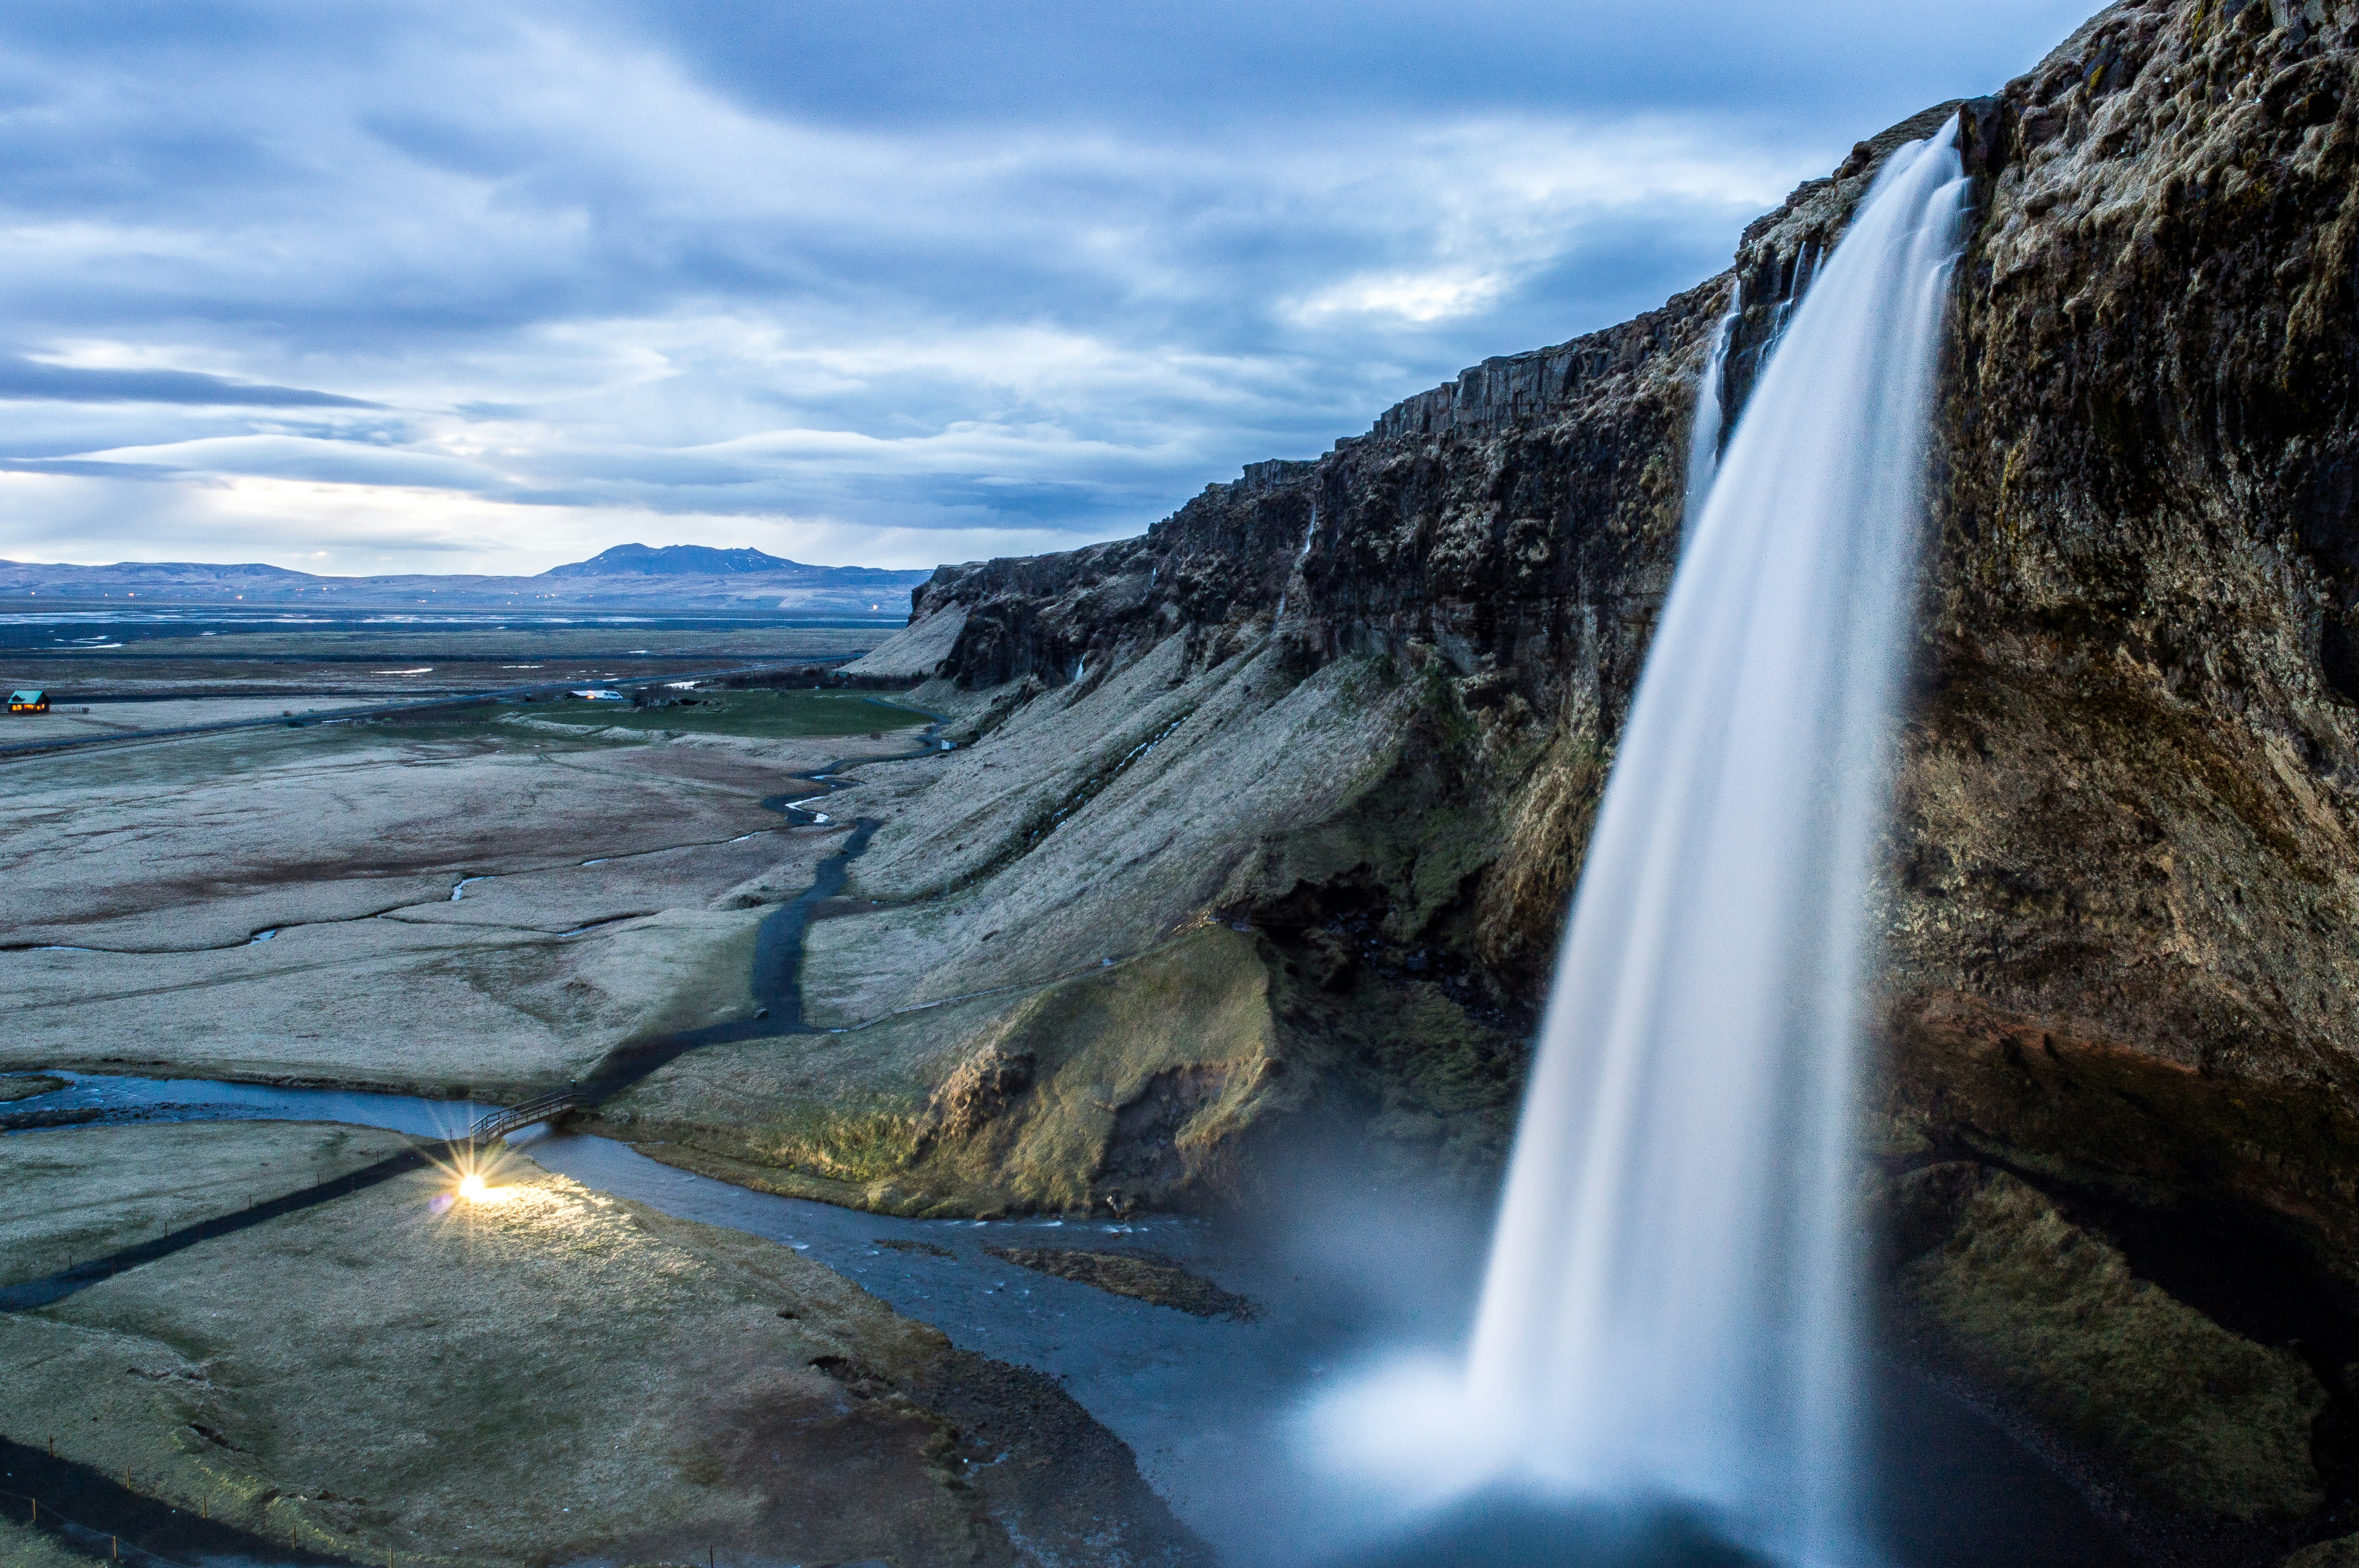 timelapse photography of water falls